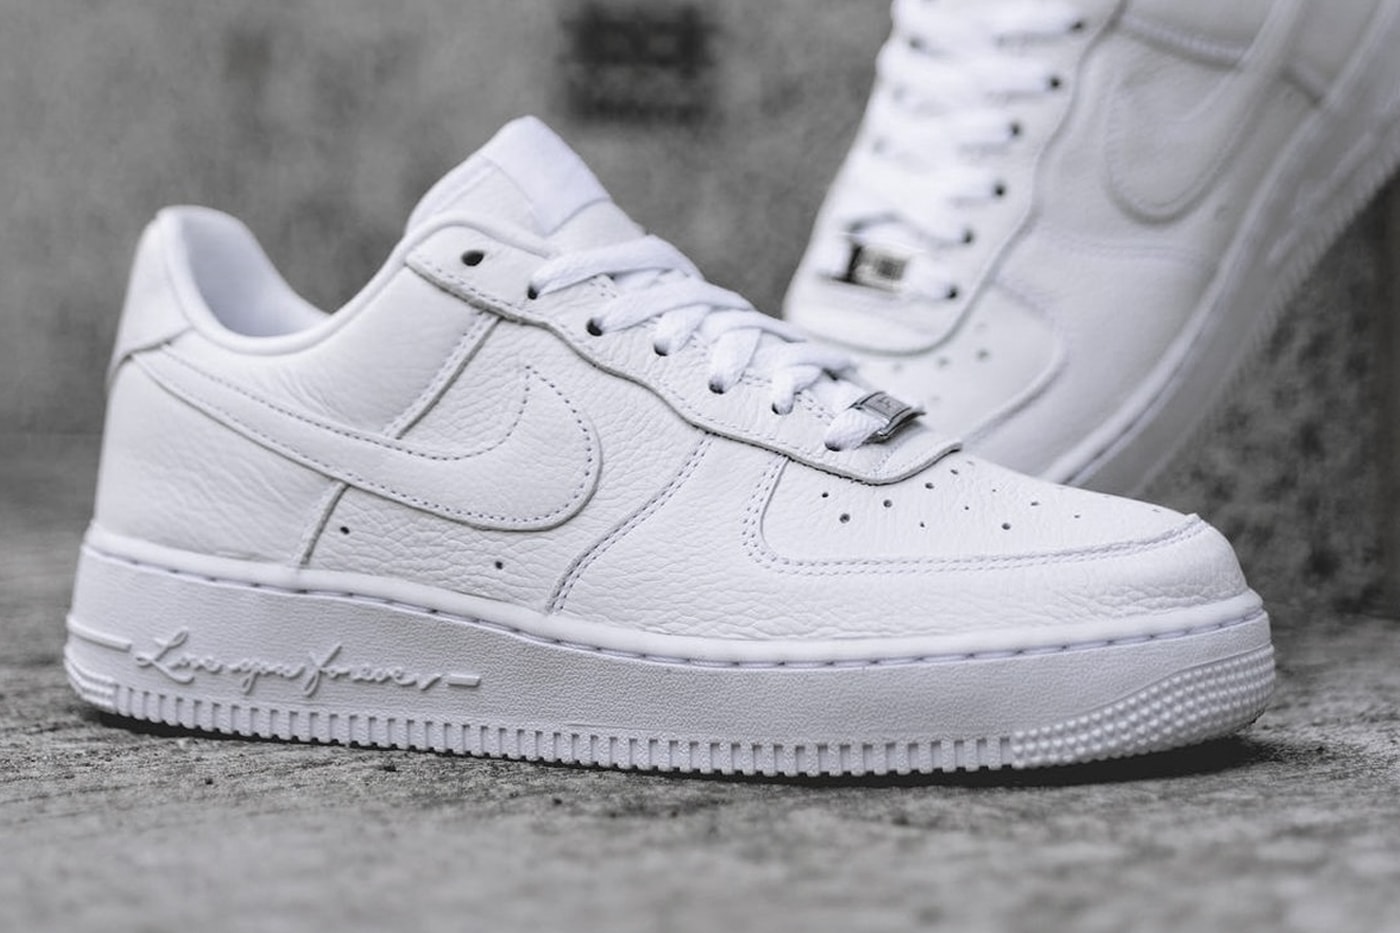 Drake NOCTA Nike Air Force 1 Certified Lover Boy Detailed Look DA3825-100 Release Info Date Buy Price 